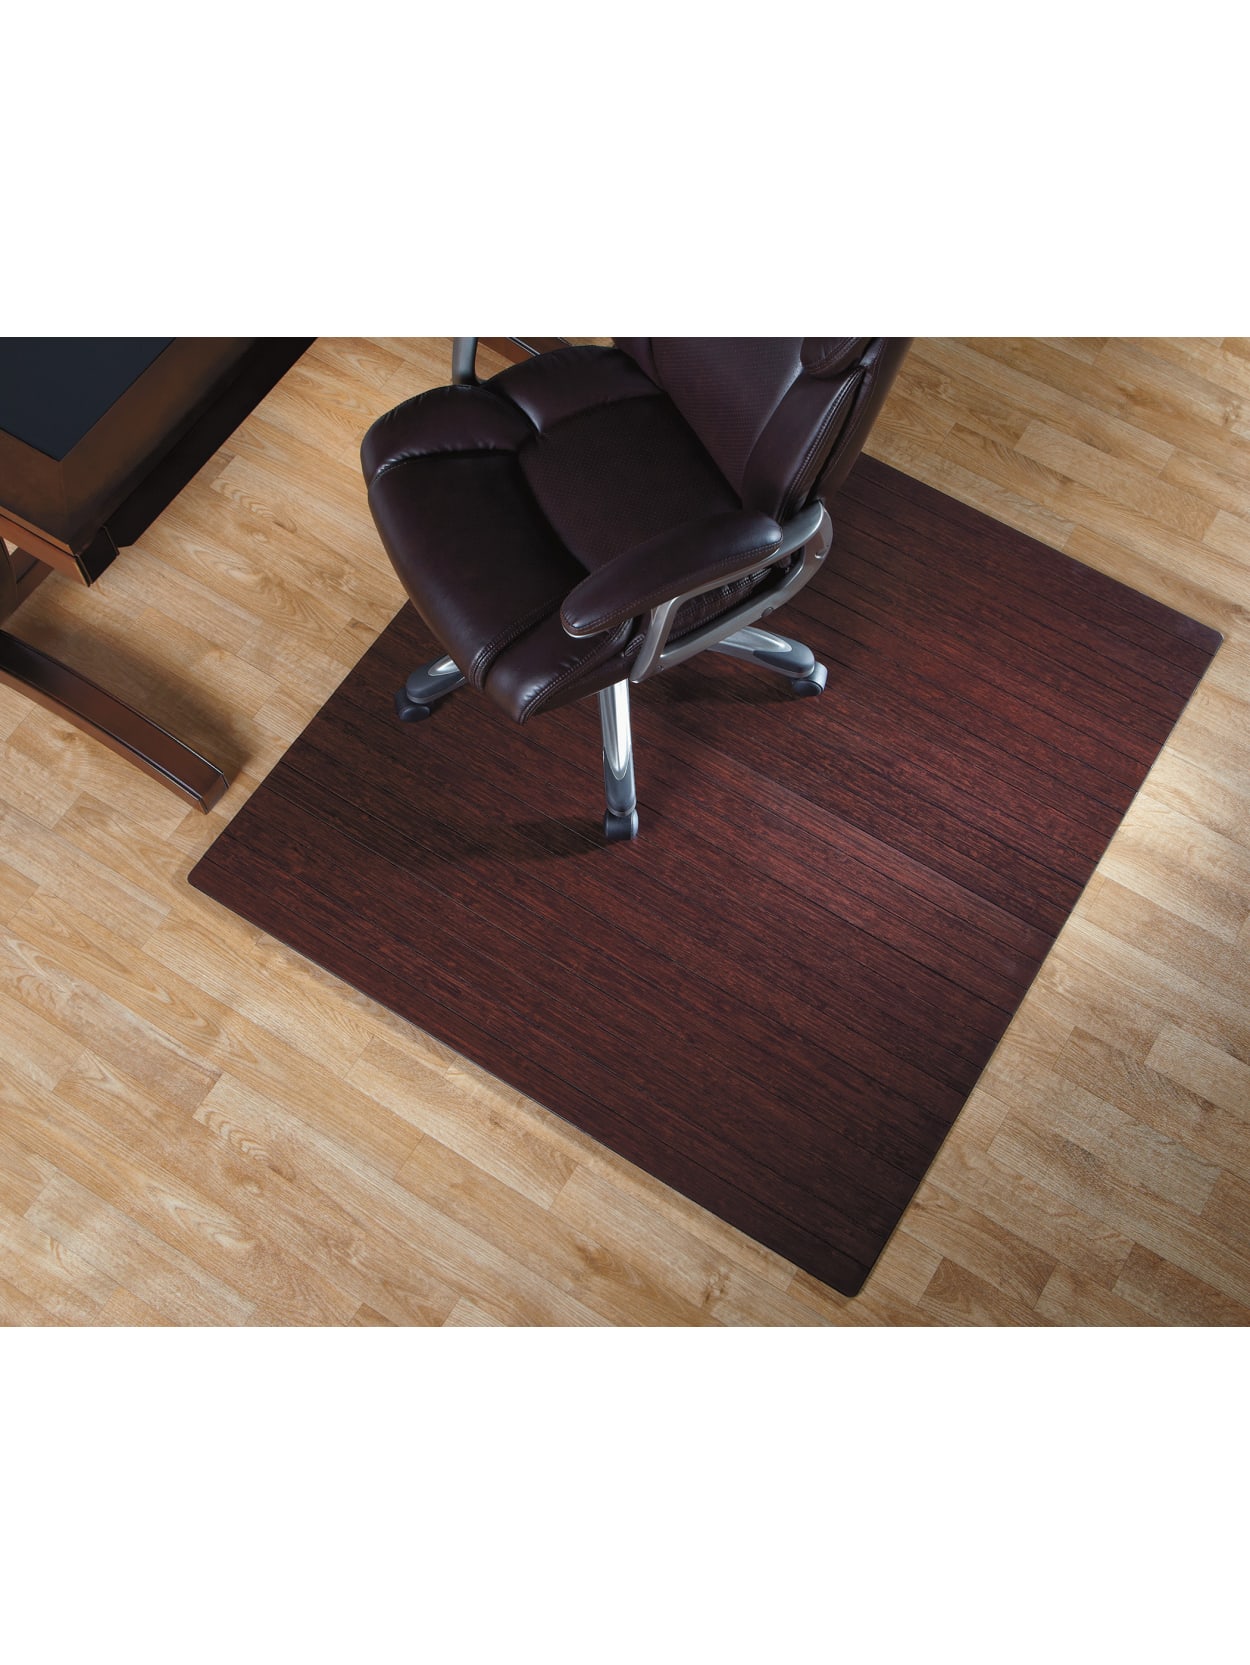 1345725 P 48x52 Bamboo Roll Up Chairmat